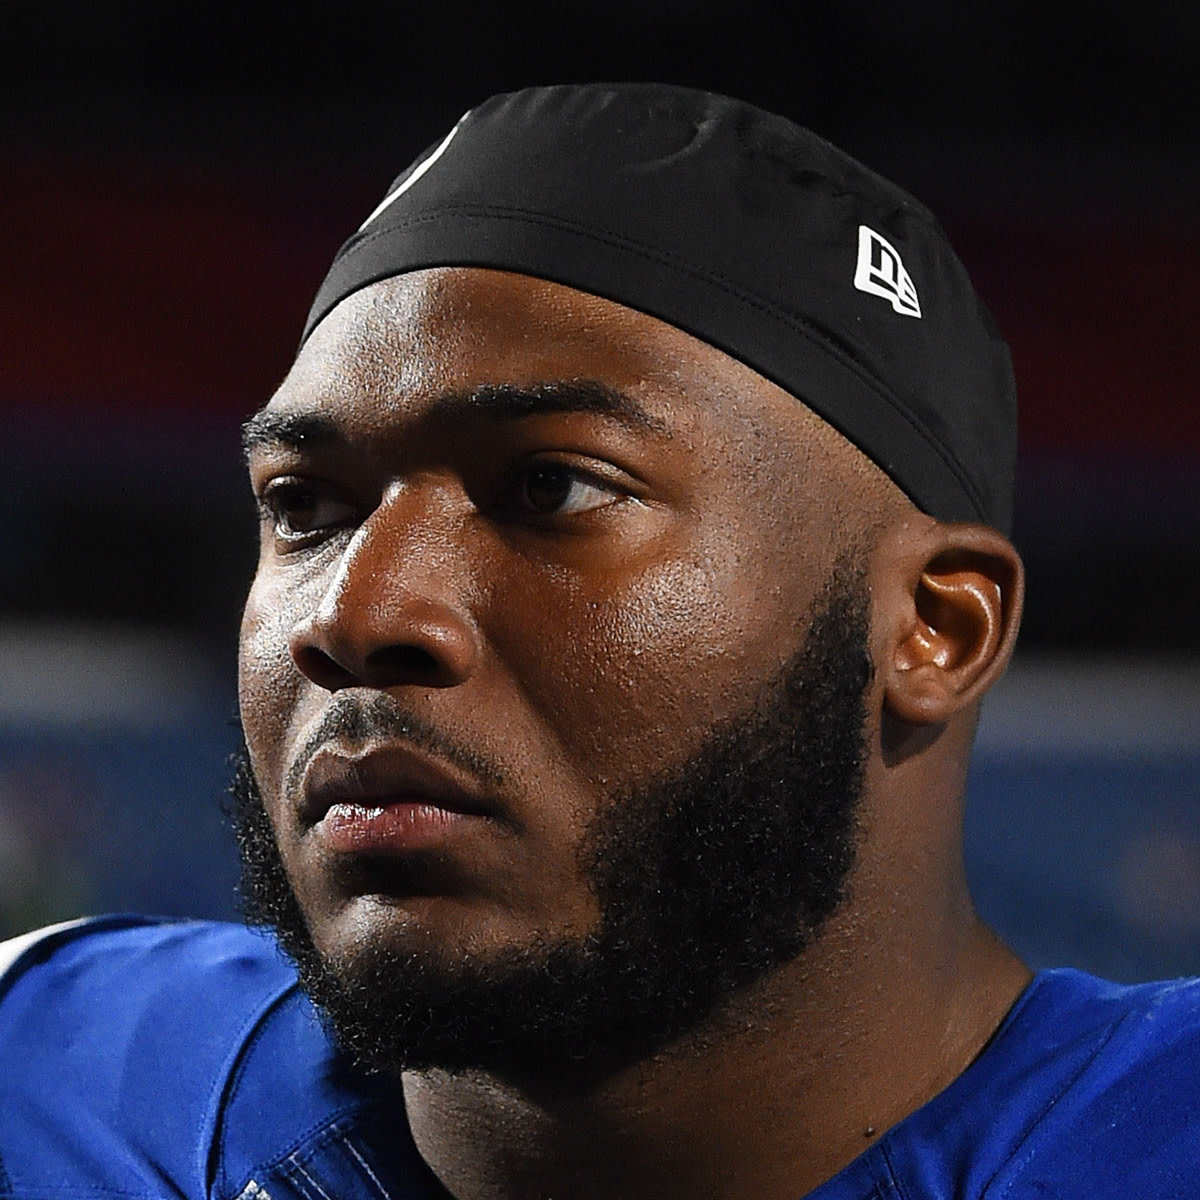 Indianapolis Colts defensive tackle Tyquan Lewis, a 2018 second-round pick out of Ohio State, has missed 15 games due to injuries in two NFL seasons.